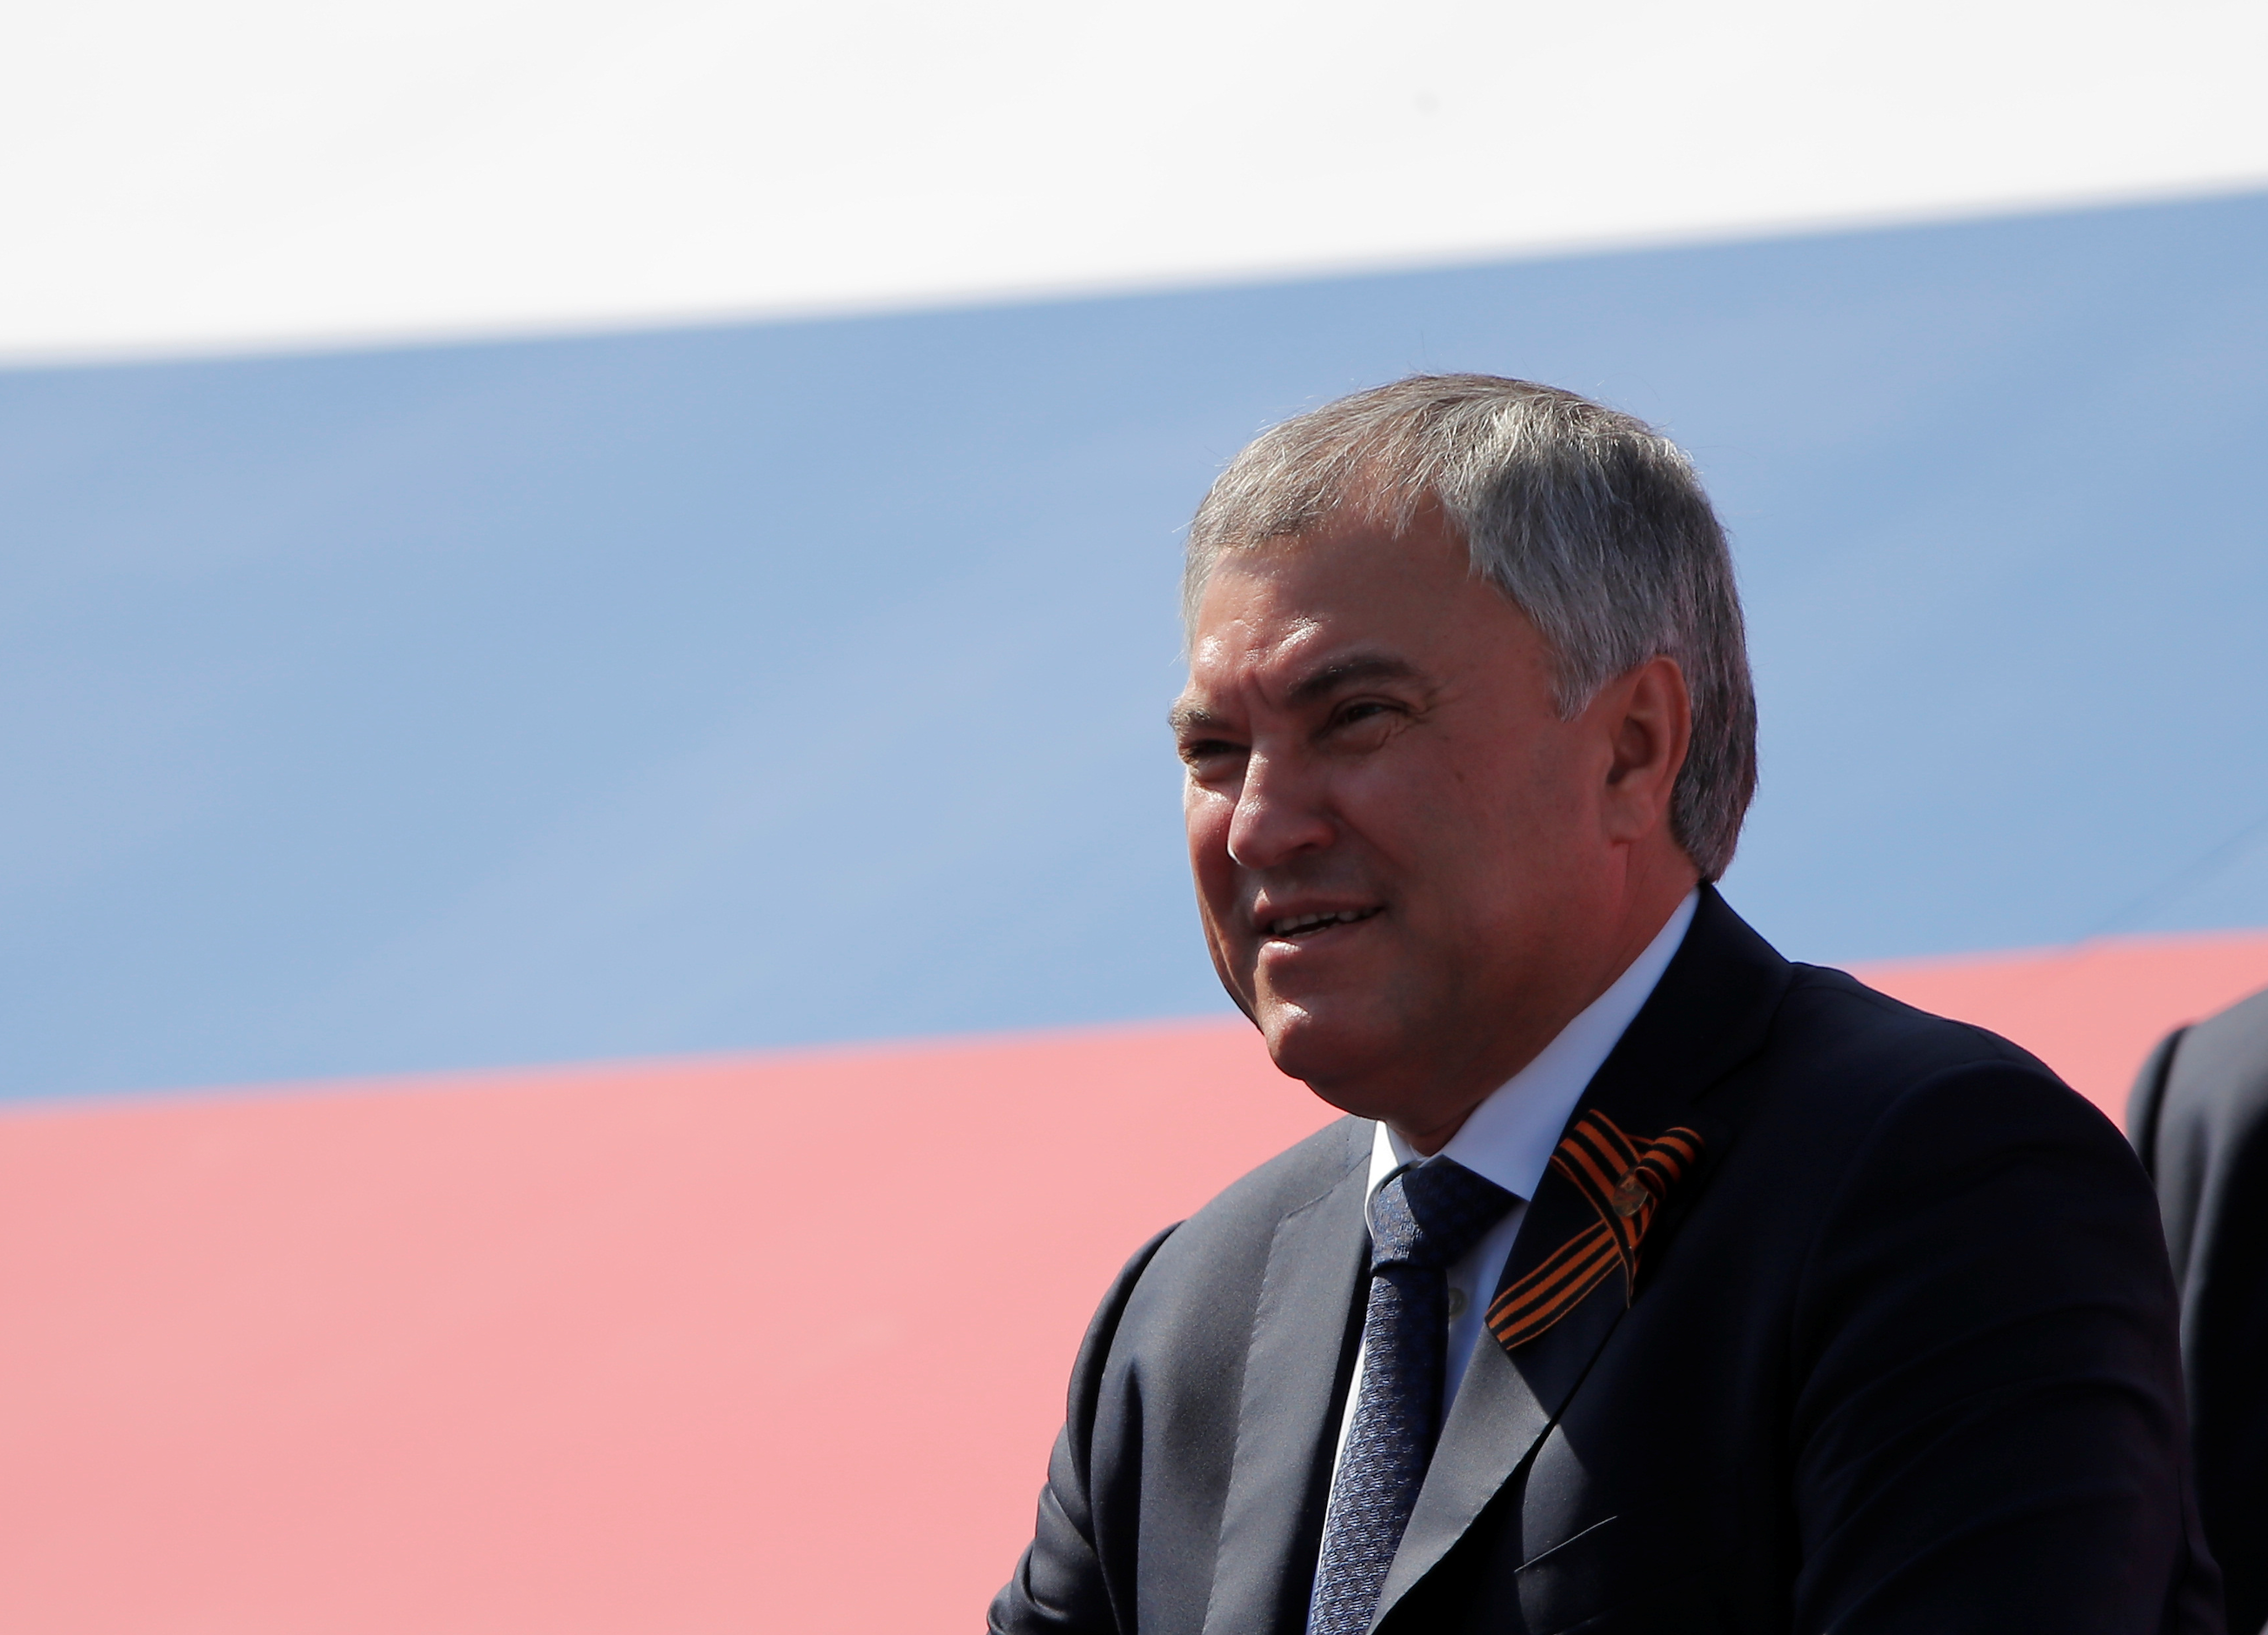 Returning Russians who sided with Ukraine must be sent to Gulag region, says Putin ally